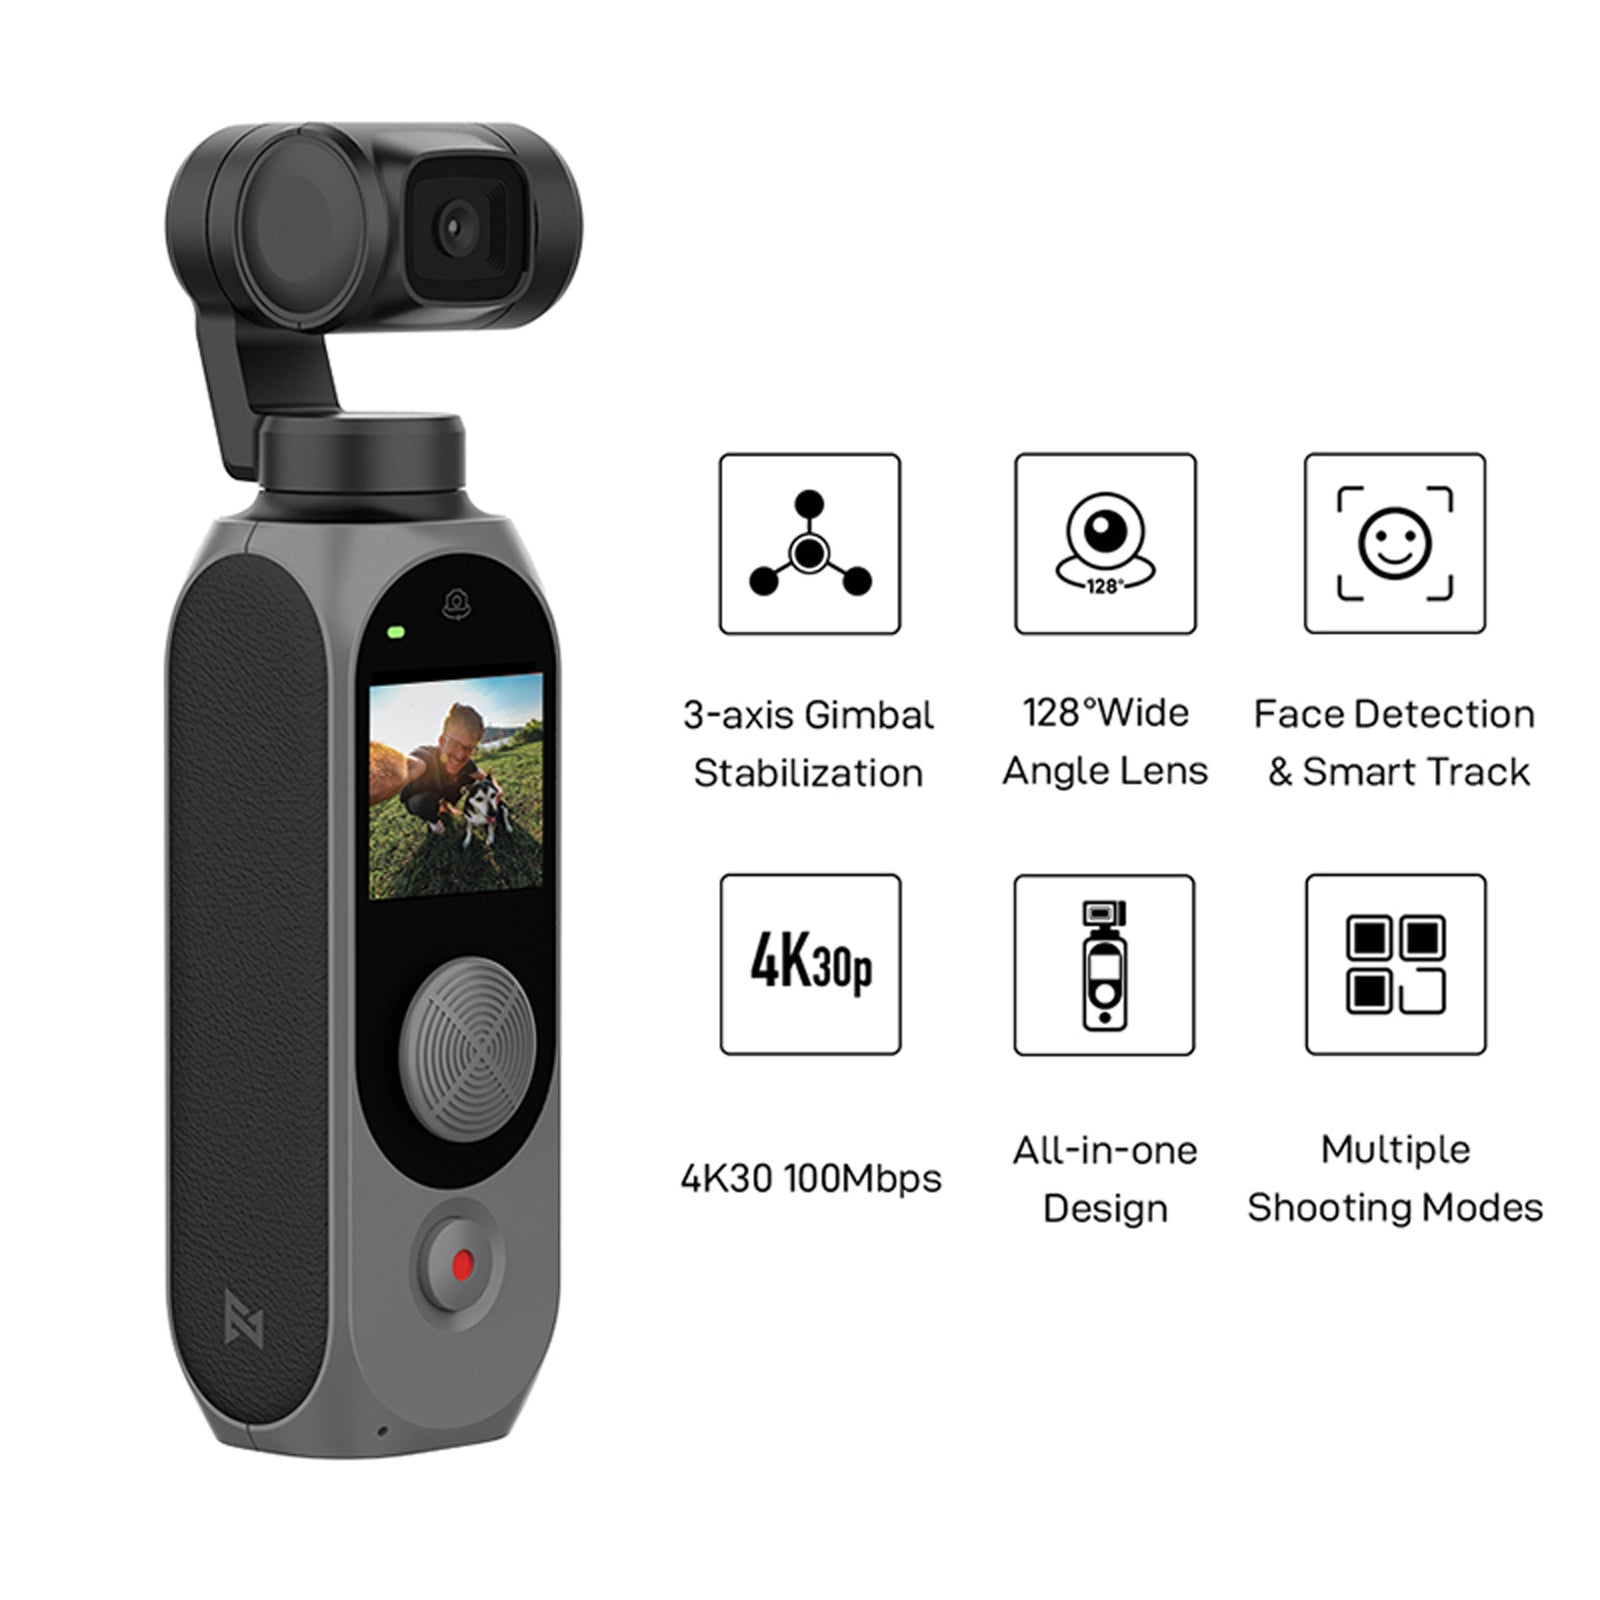 FIMI Palm 2 Gimbal Camera with 128° 4K UHD Ultra Wide Angle Lens for Android and iPhone, Black